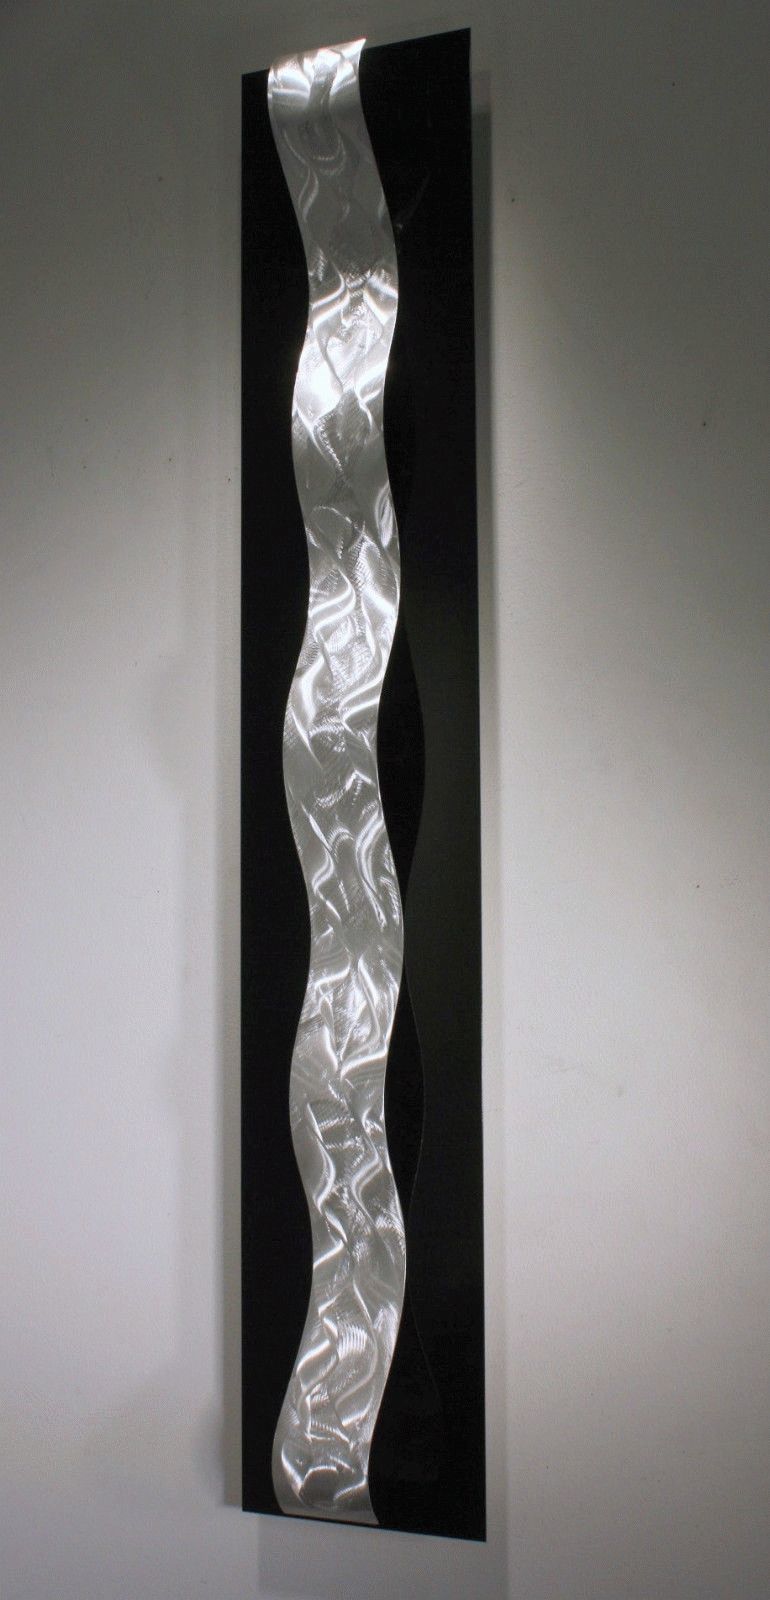 Wilmos Kovacs – Black And Silver Metal Wall Art 3d Home Decor Within Latest 3d Metal Wall Art Sculptures (View 17 of 20)